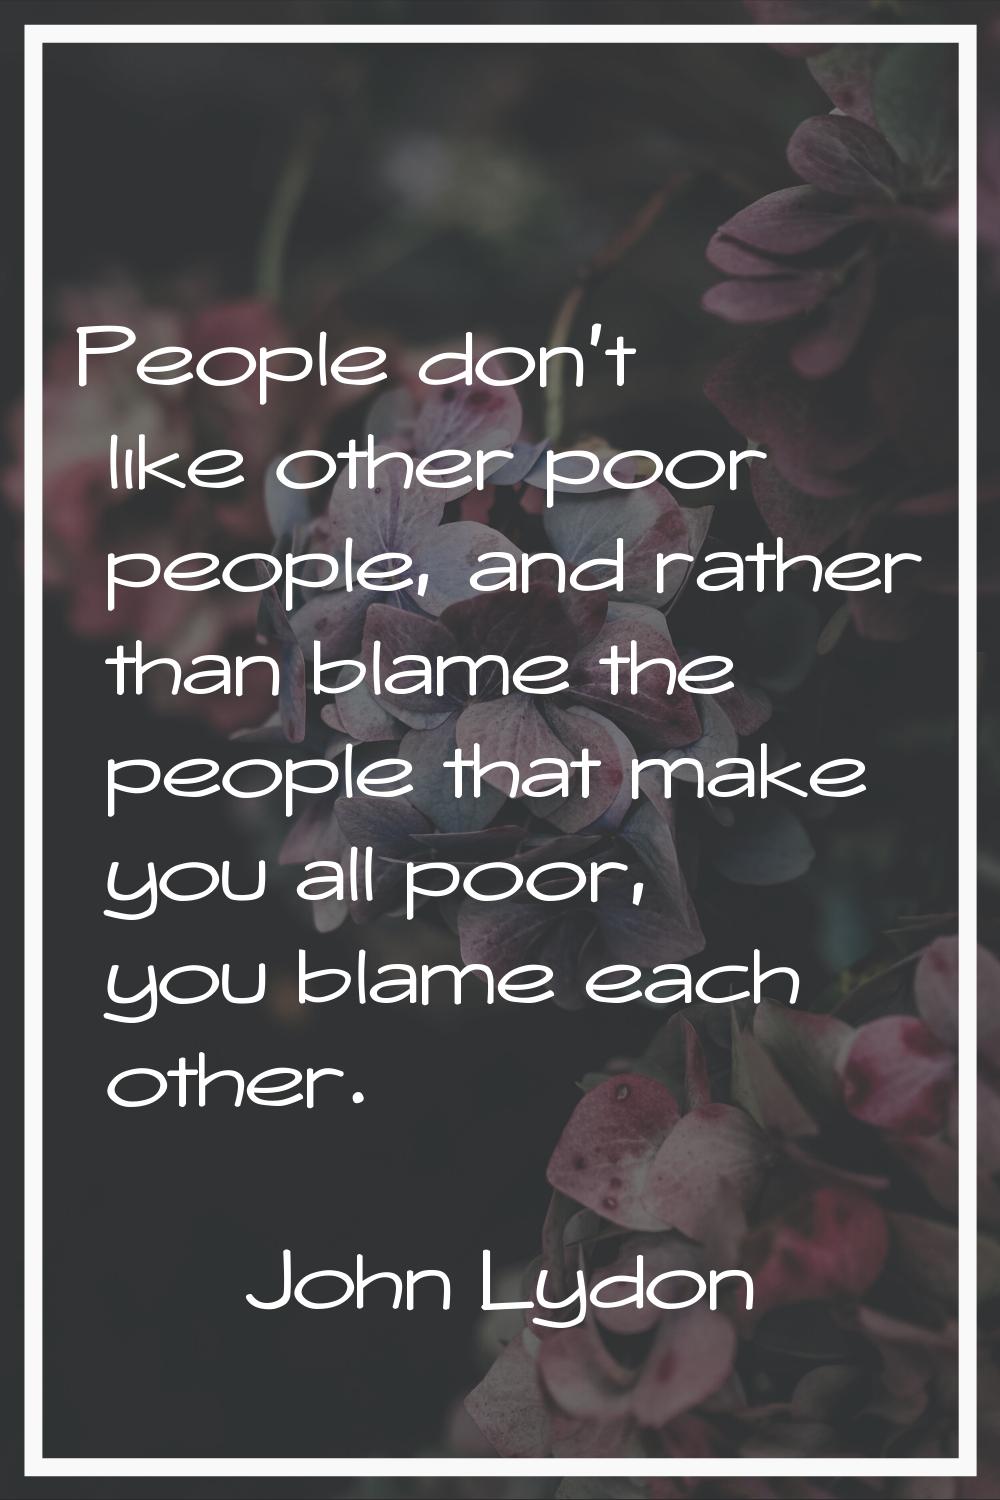 People don't like other poor people, and rather than blame the people that make you all poor, you b